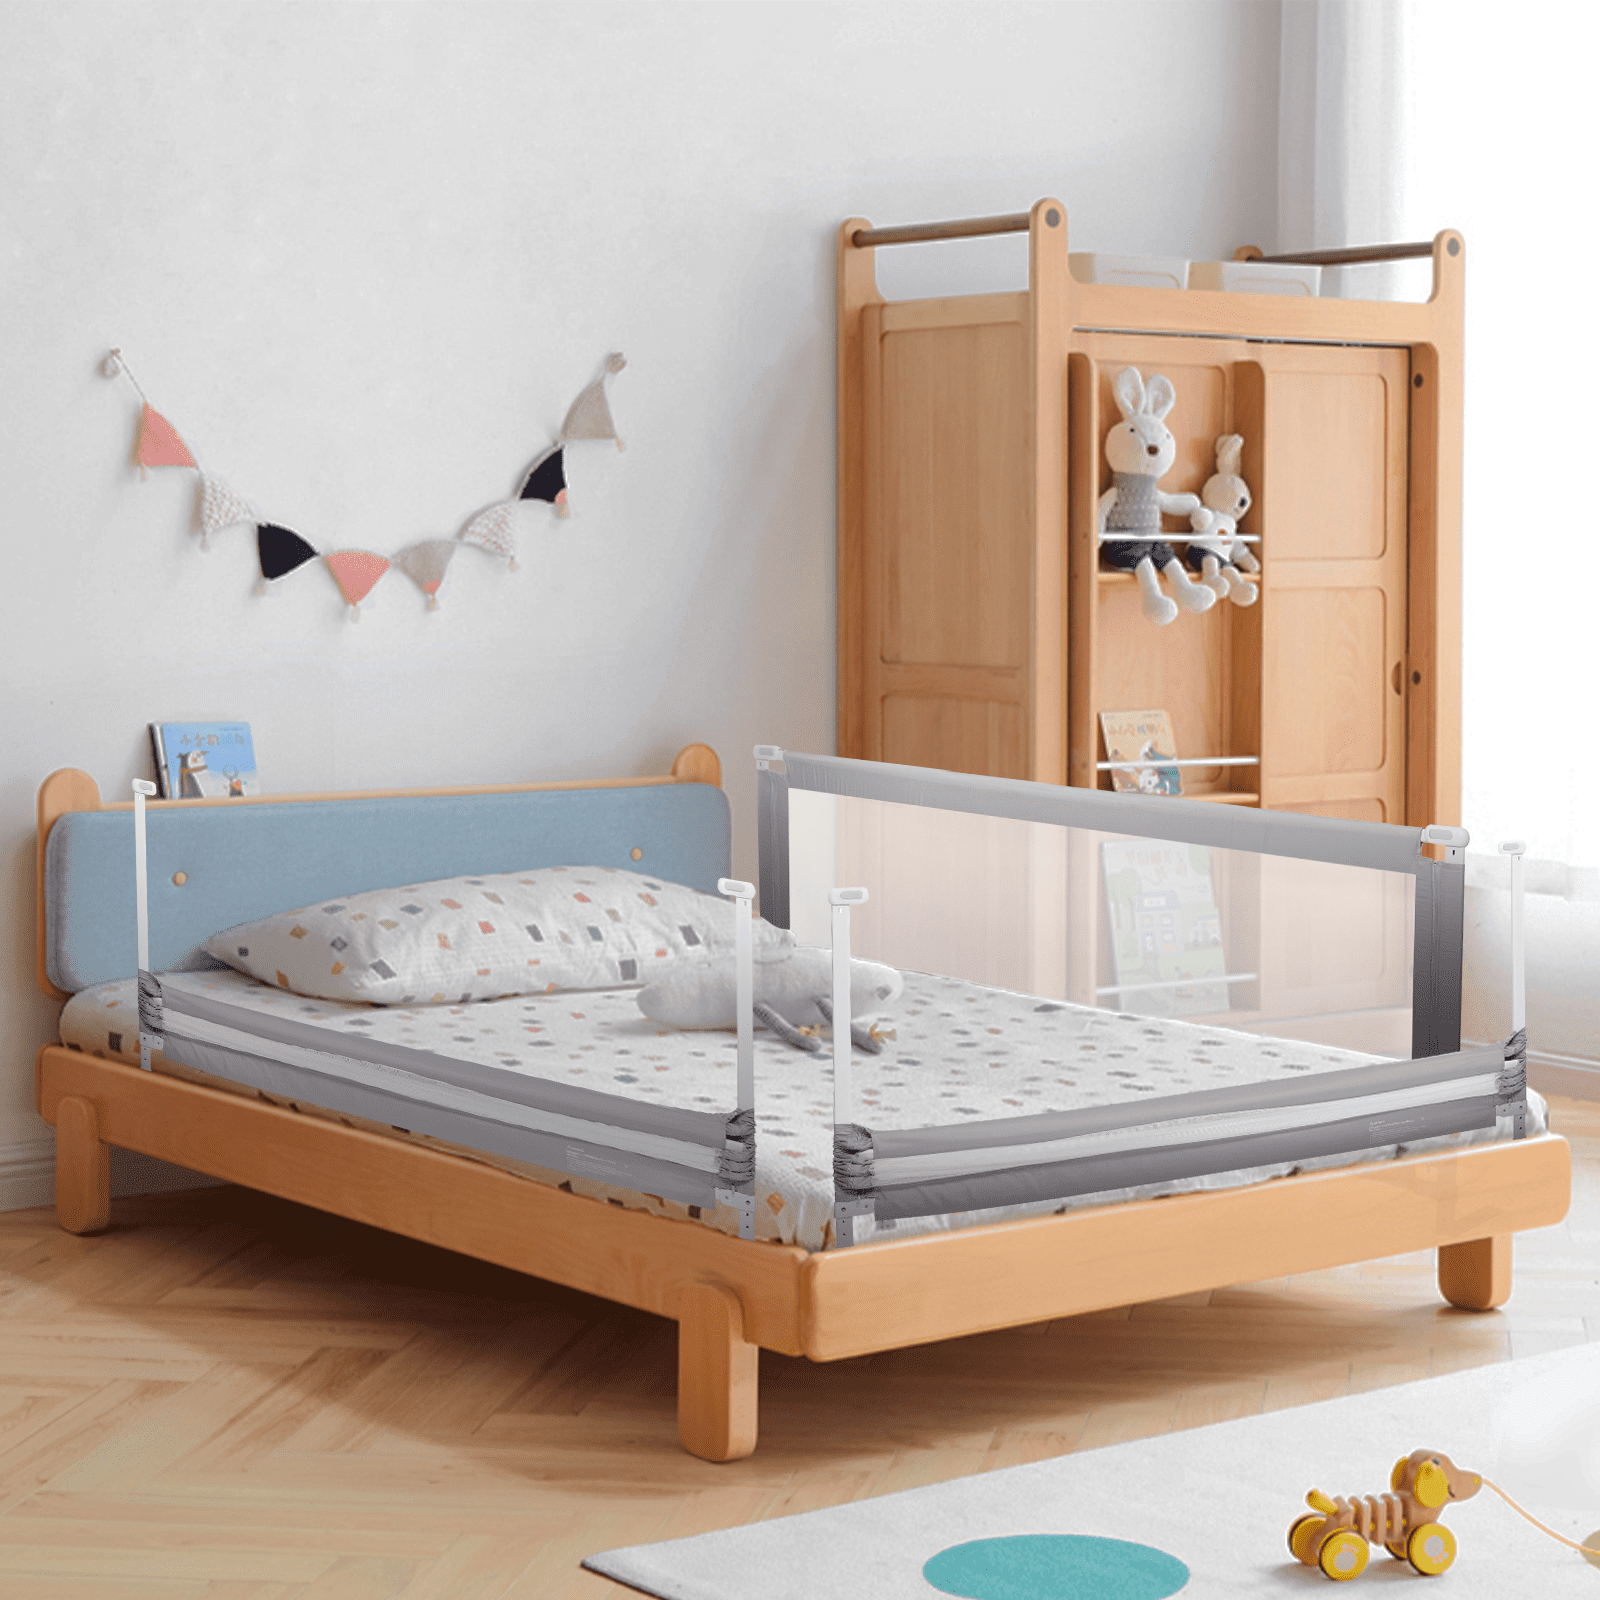 Double Swing Down Bedrail for Convertible Crib Full Size Queen & King BABY JOY Toddlers Bed Rail Guard Kids Twin Stainless Steel Folding Safety Bed Guard Gray, 59-Inch